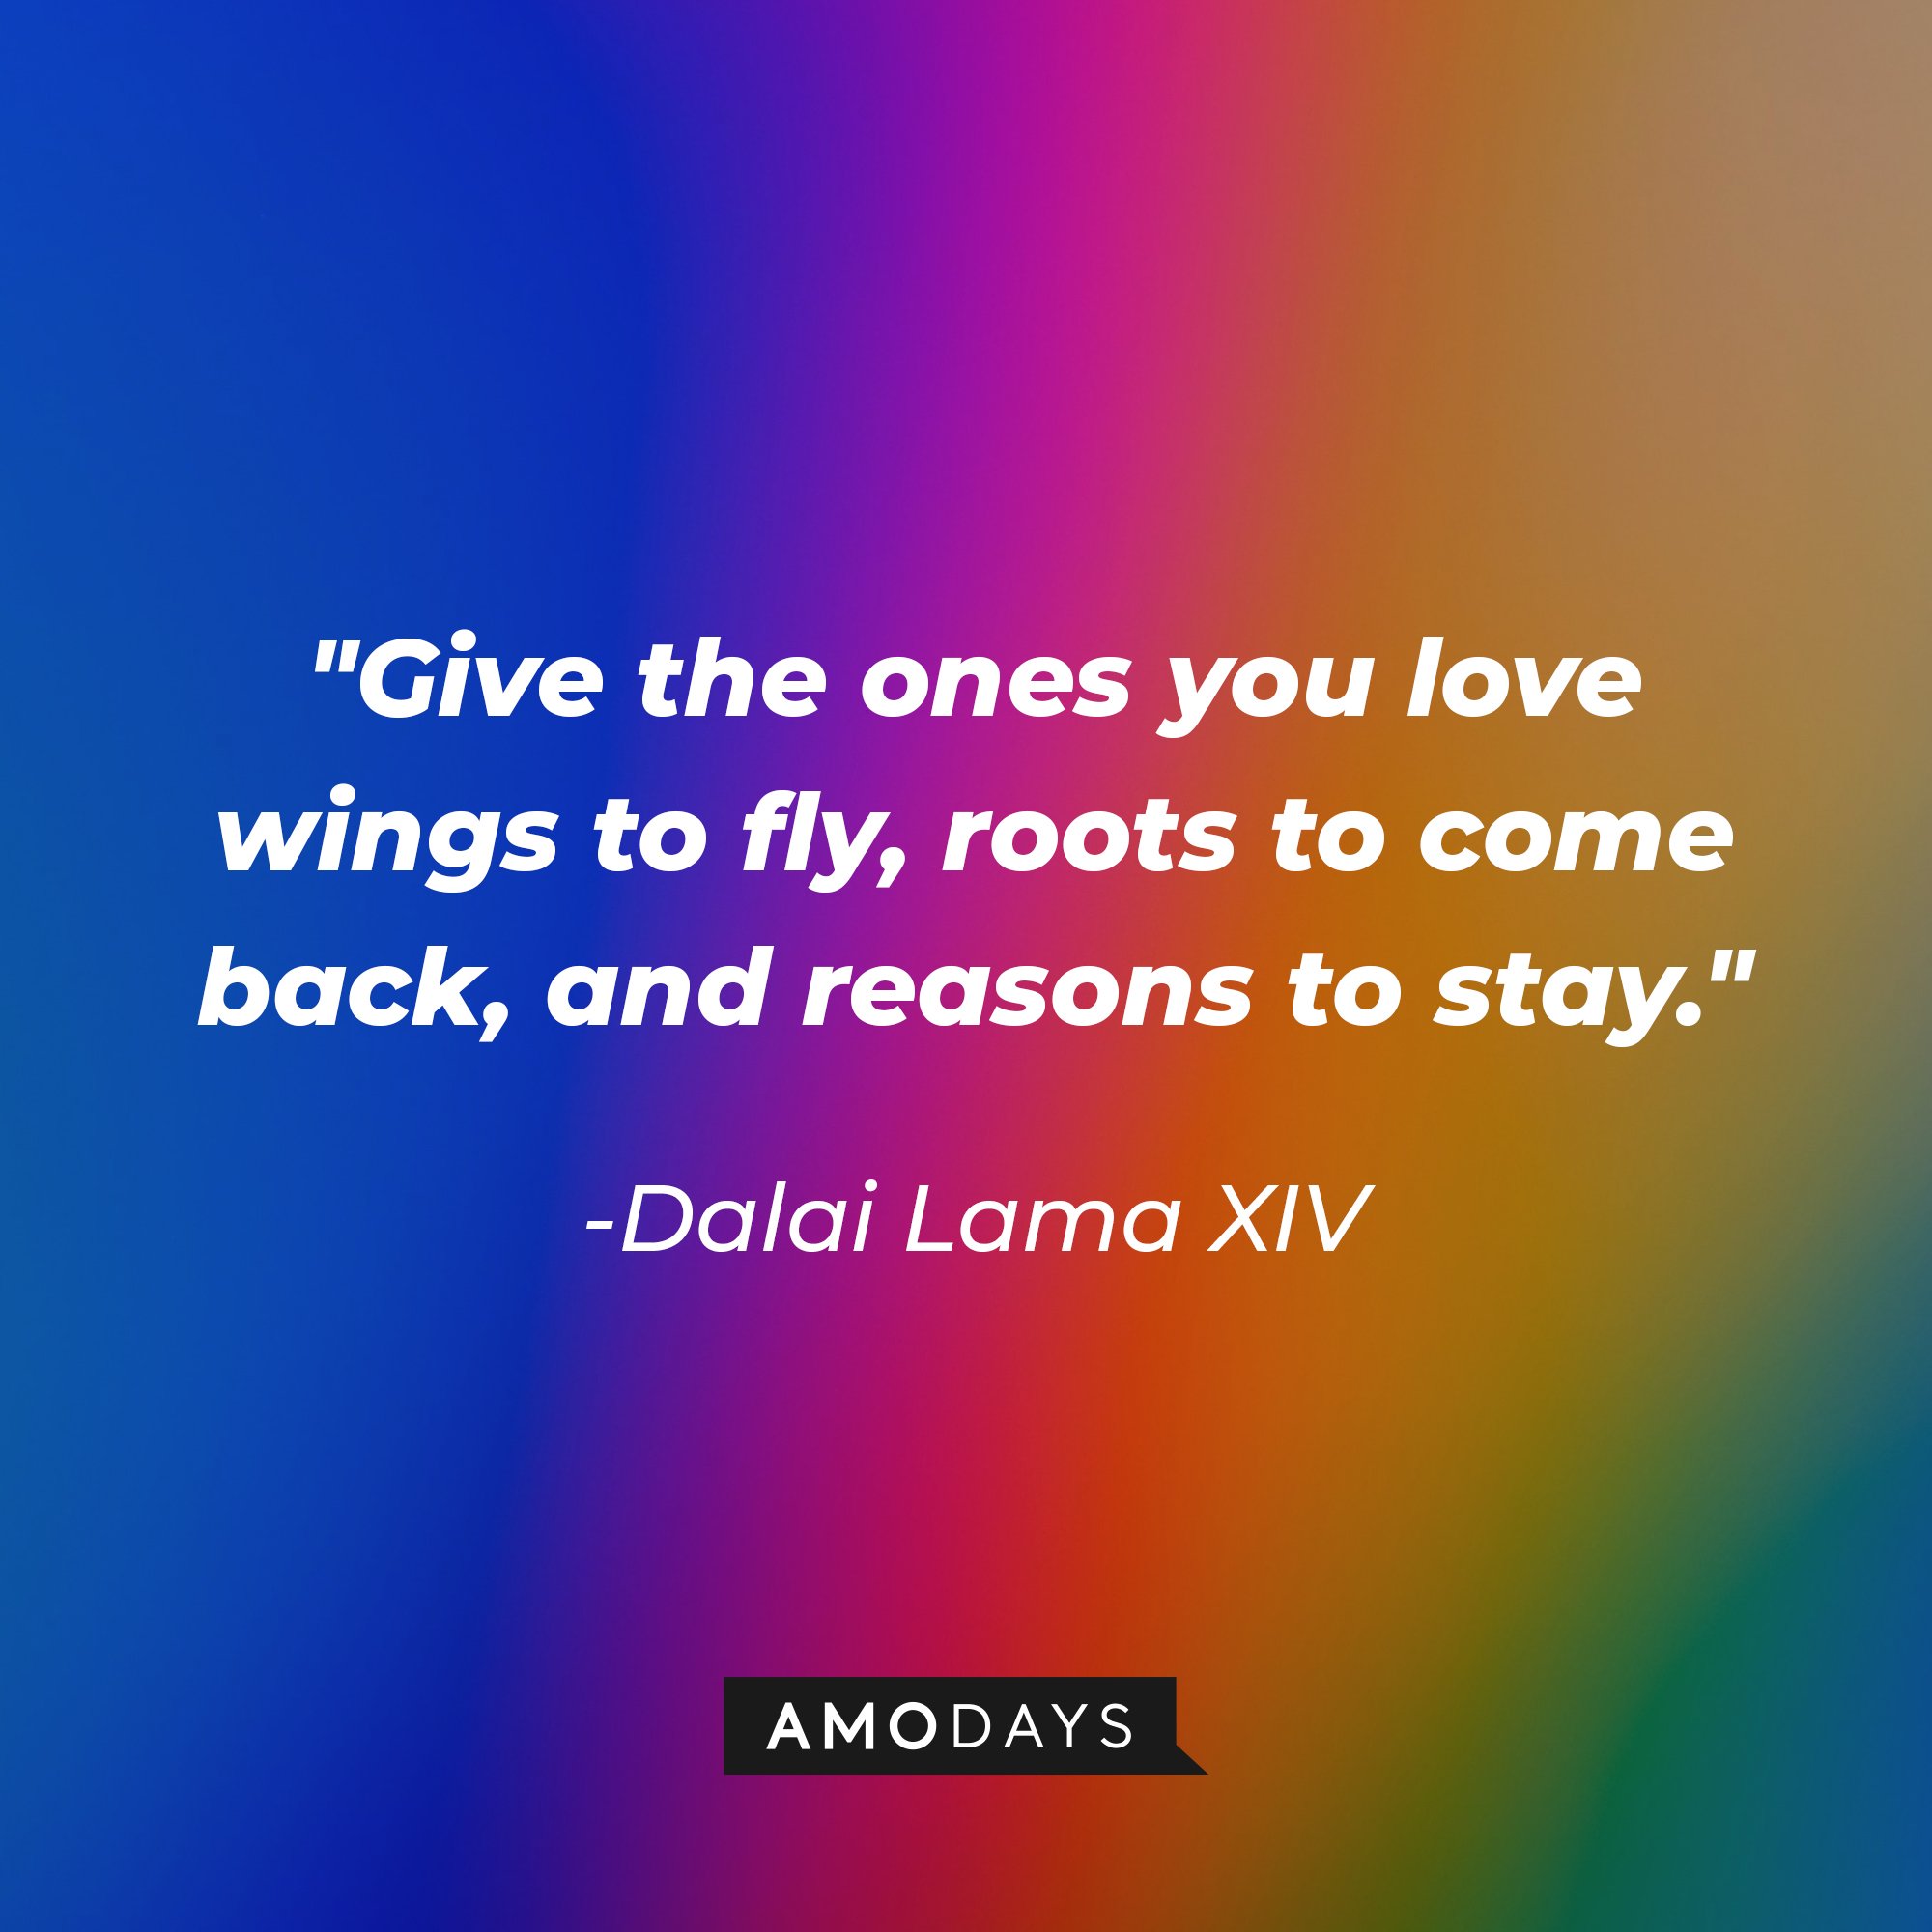 The Dalai Lama XIV’s quote: "Give the ones you love wings to fly, roots to come back, and reasons to stay." | Image: AmoDays